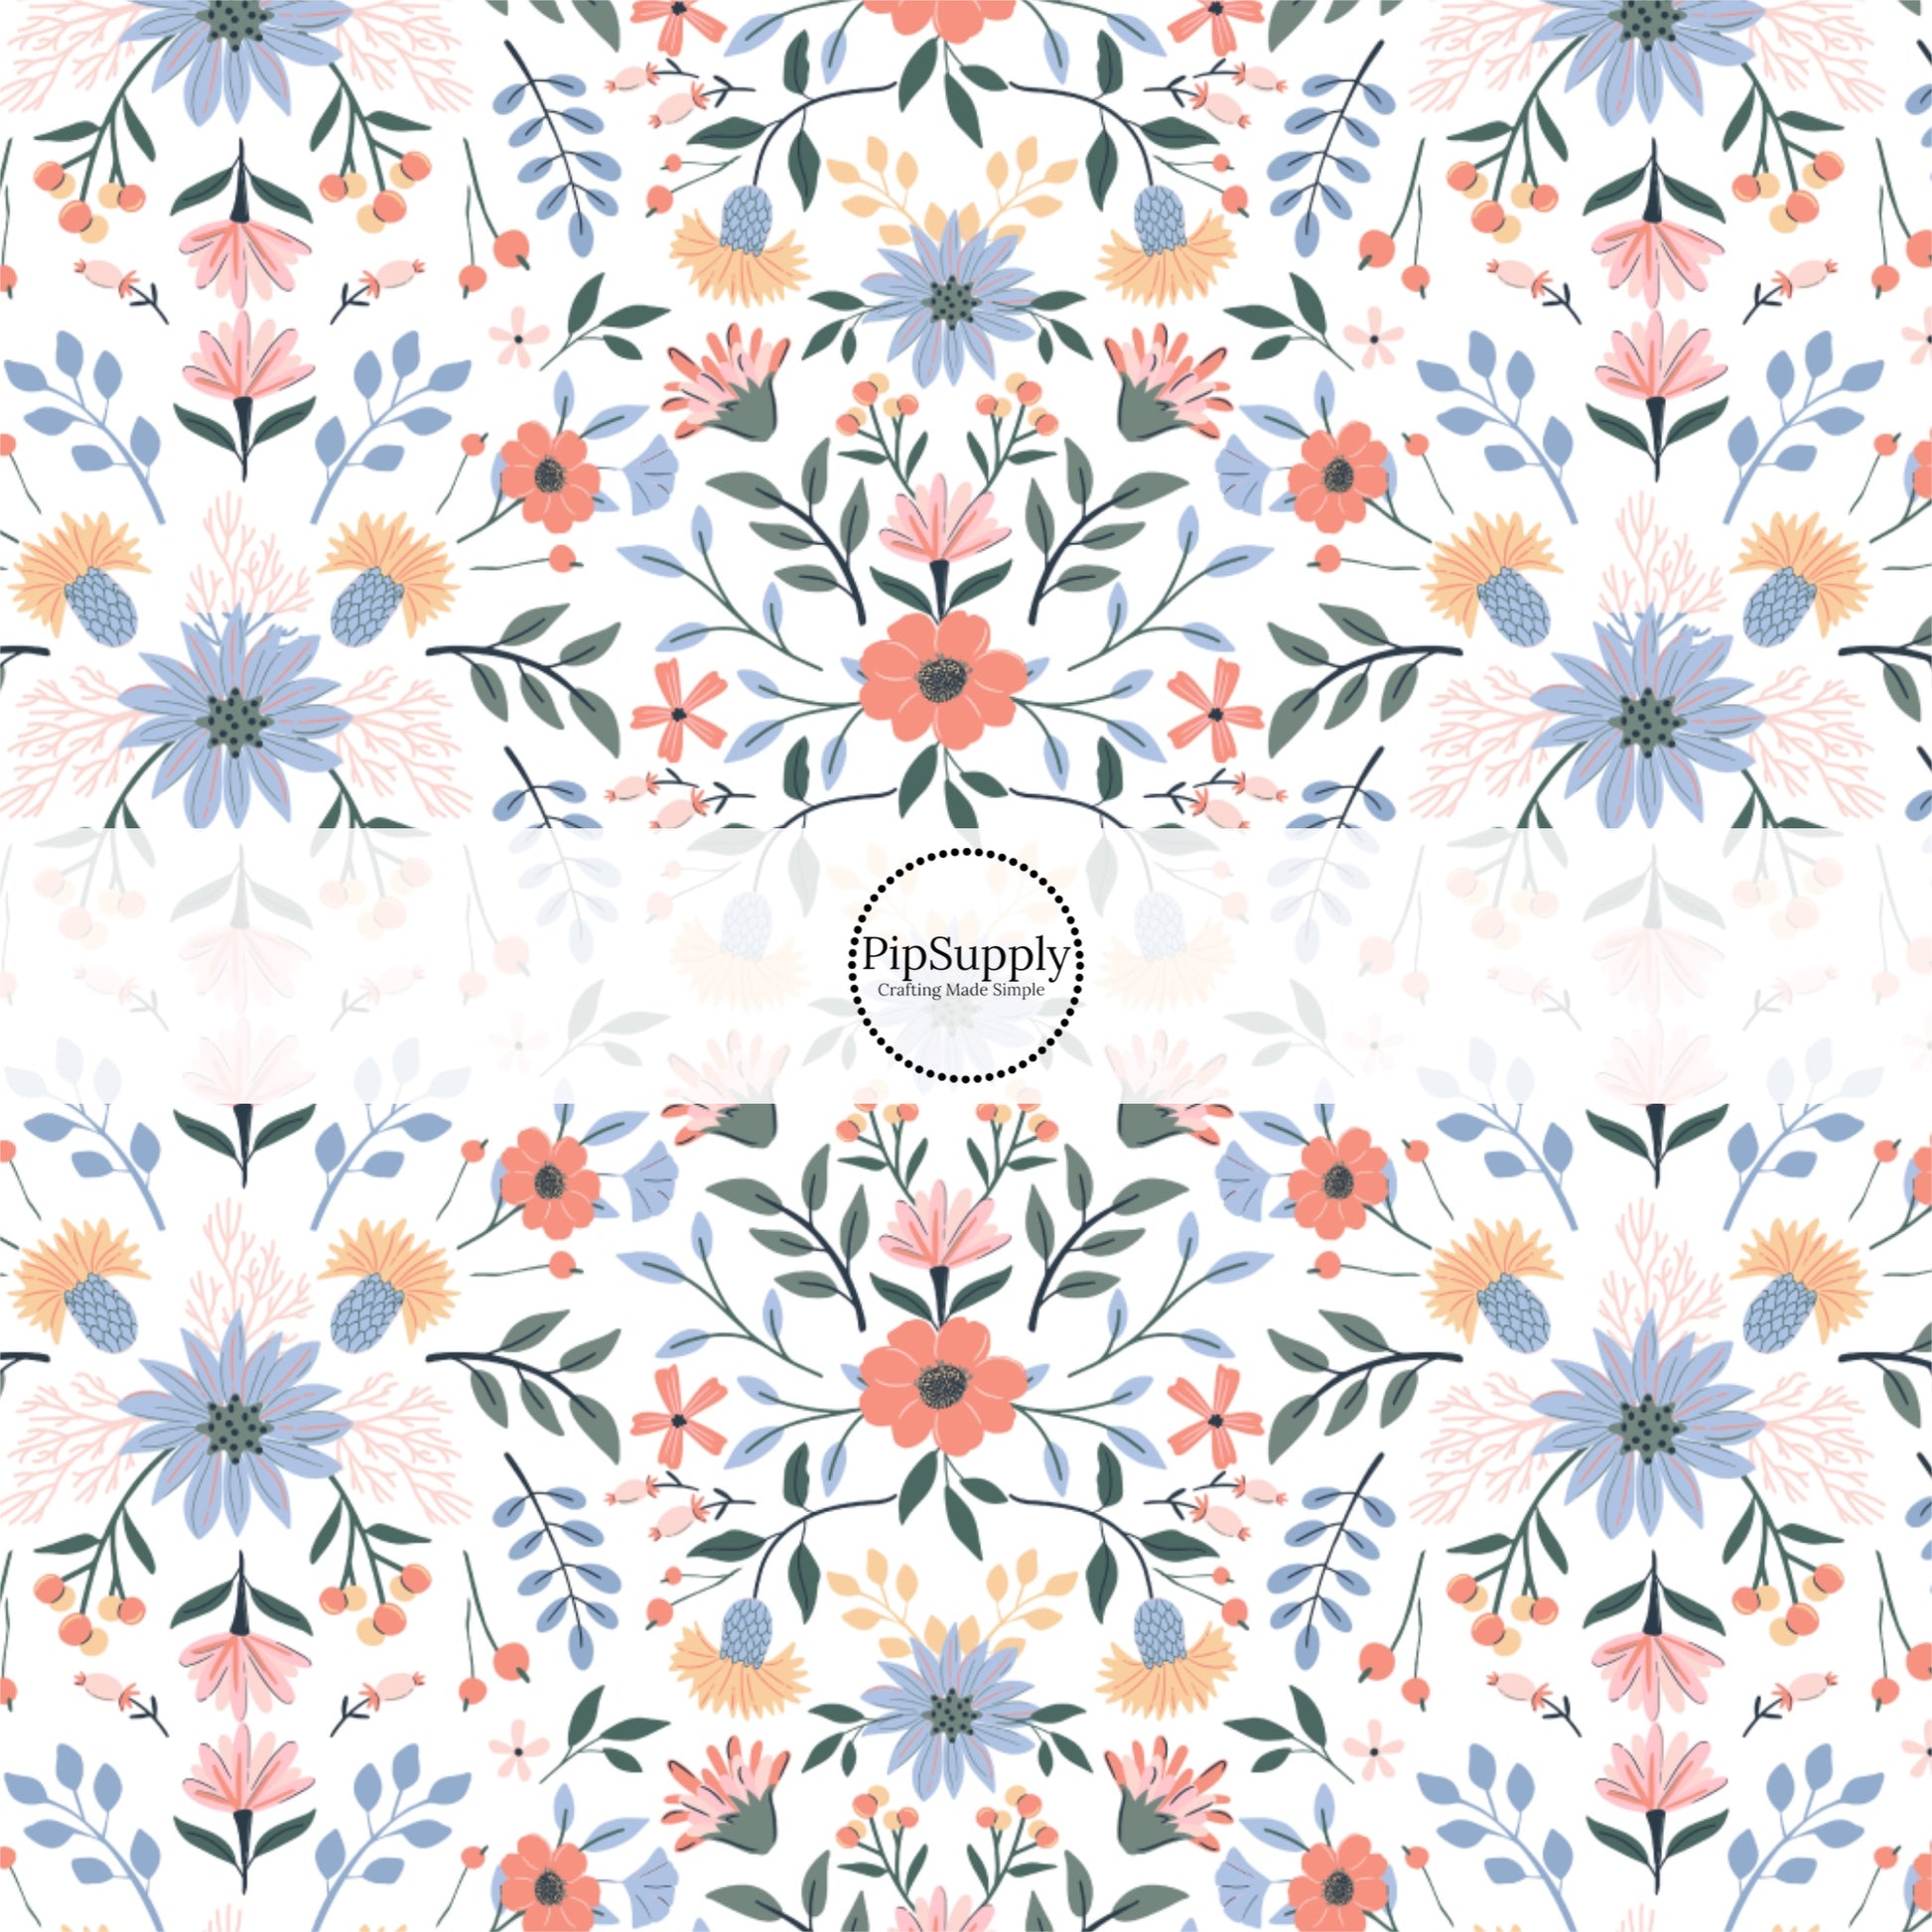 Bright Western Florals on Cream Fabric by the Yard.